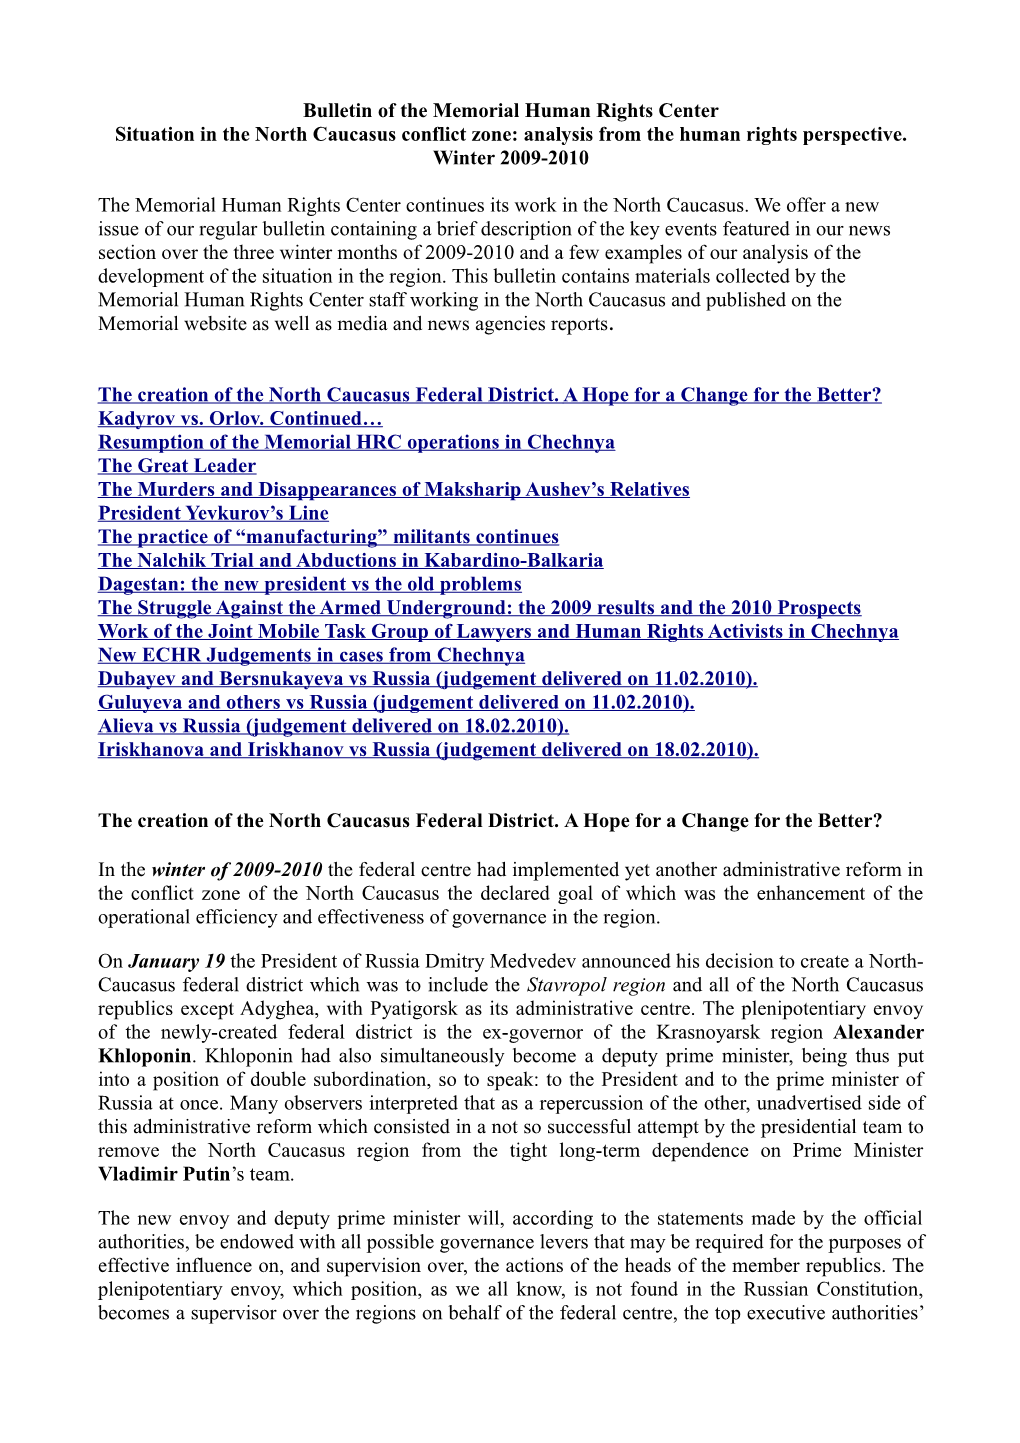 Bulletin of the Memorial Human Rights Center Situation in the North Caucasus Conflict Zone: Analysis from the Human Rights Perspective